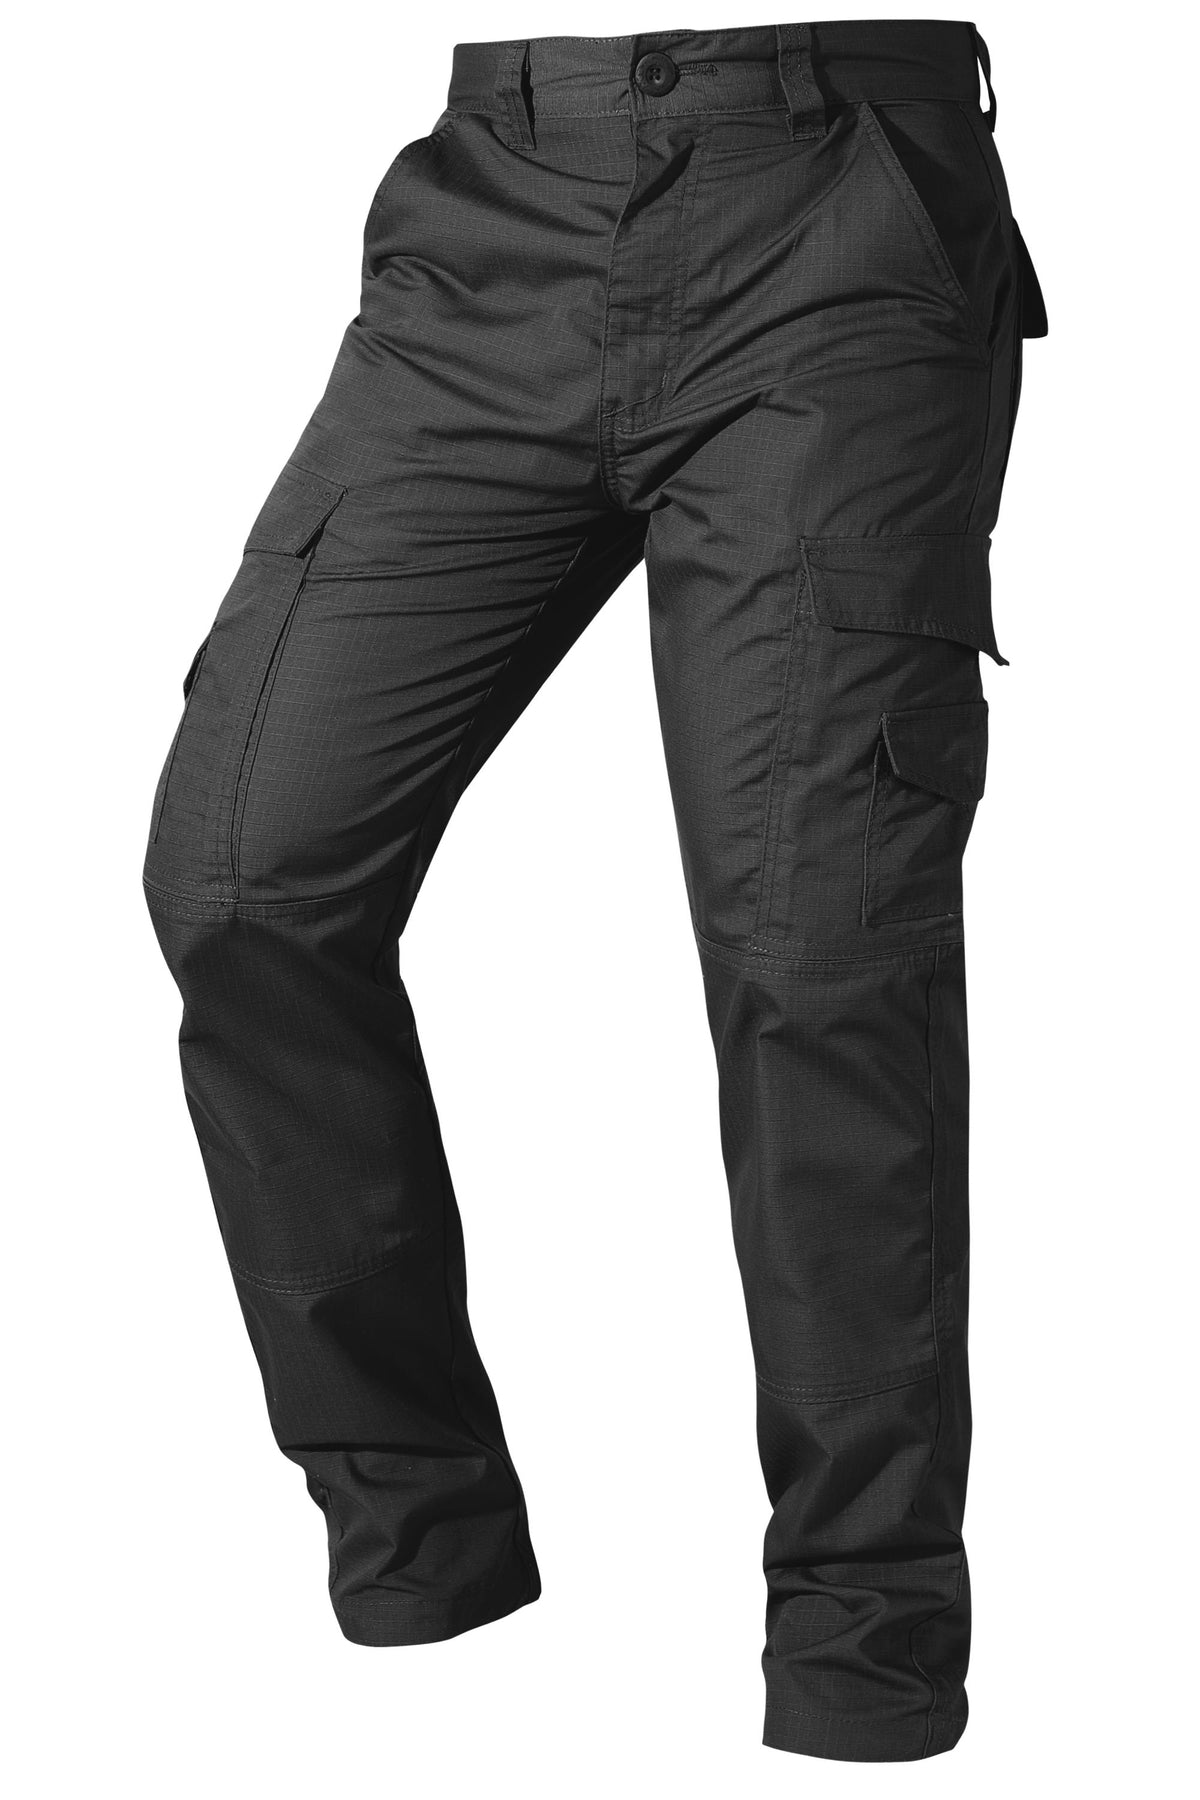 TRGPSG Men's Tactical Pants Military Combat Outdoor Work Trousers with Multi Pocket